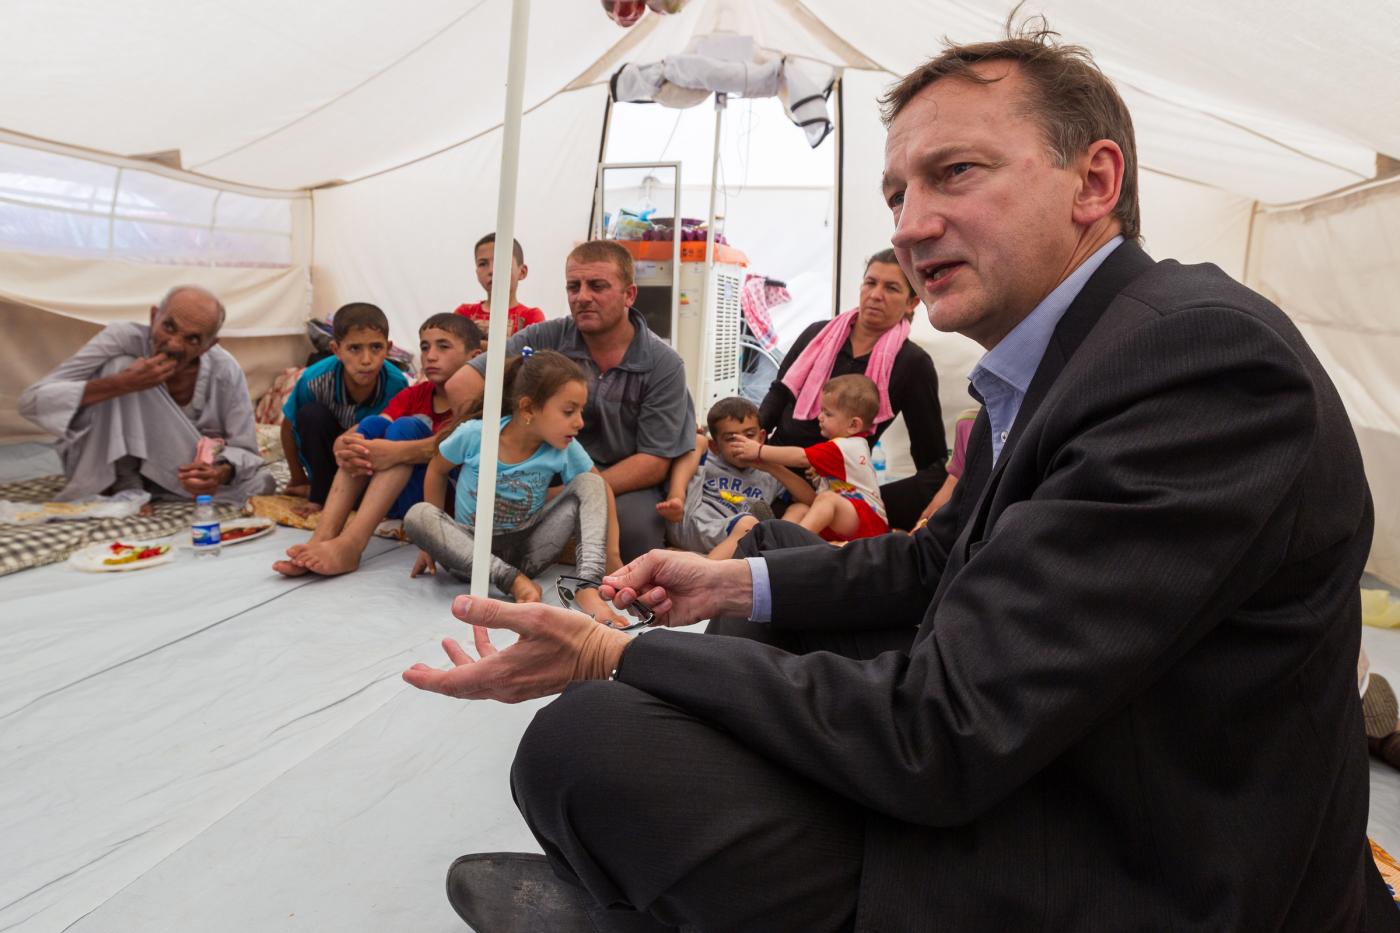 Peter Prove, CCIA director, speaks with Christian families expelled from Mosul by IS raids. These families took shelter in a tent camp established on grounds of the Chaldean Church in Erbil, Iraq. ©WCC/Gregg Brekke. Photo permission granted by parents